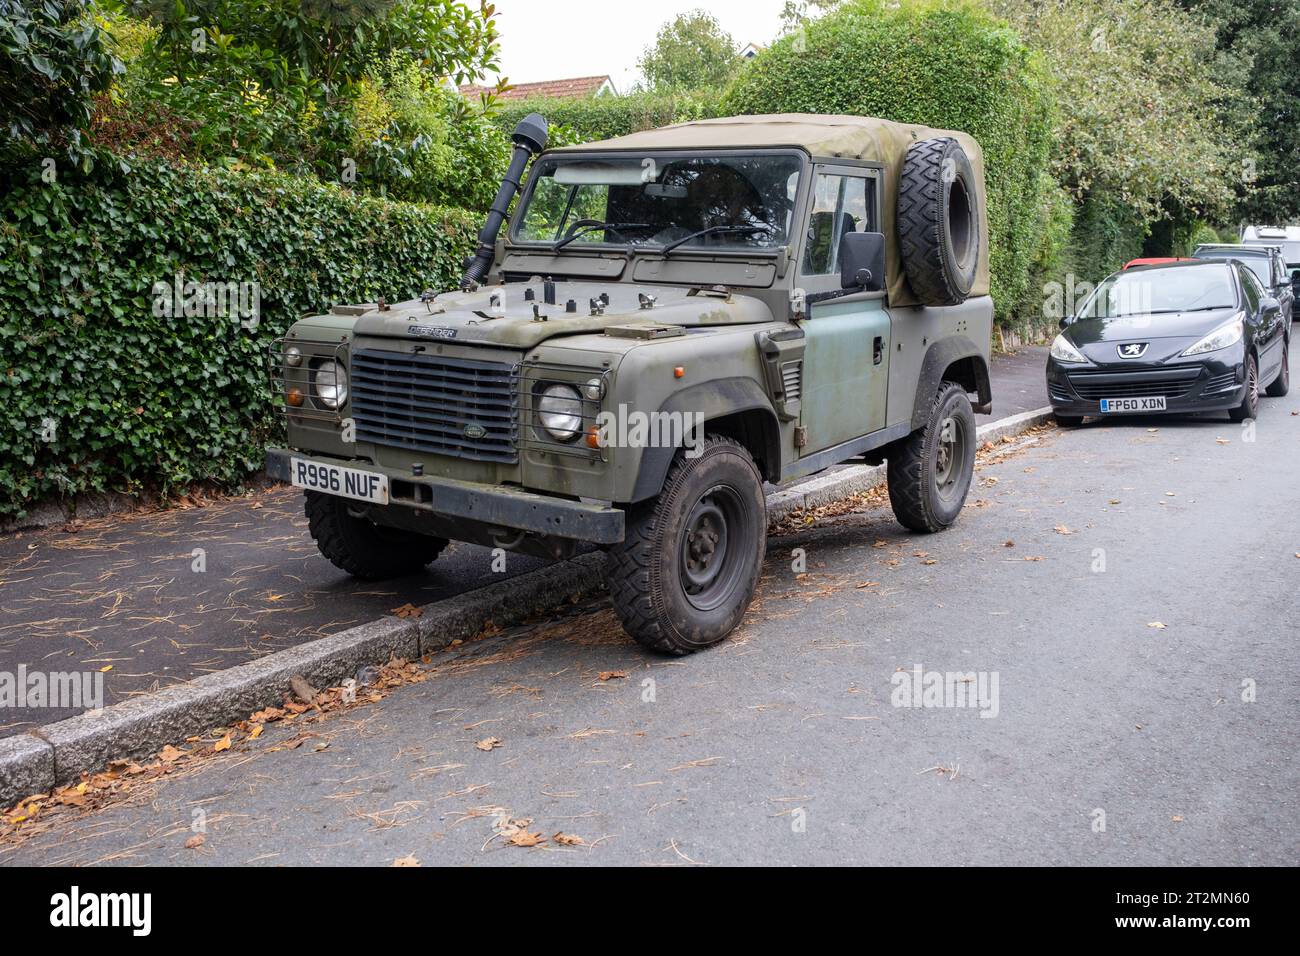 1997 Land Rover Defender 90 Wolf Soft Top Stock Photo